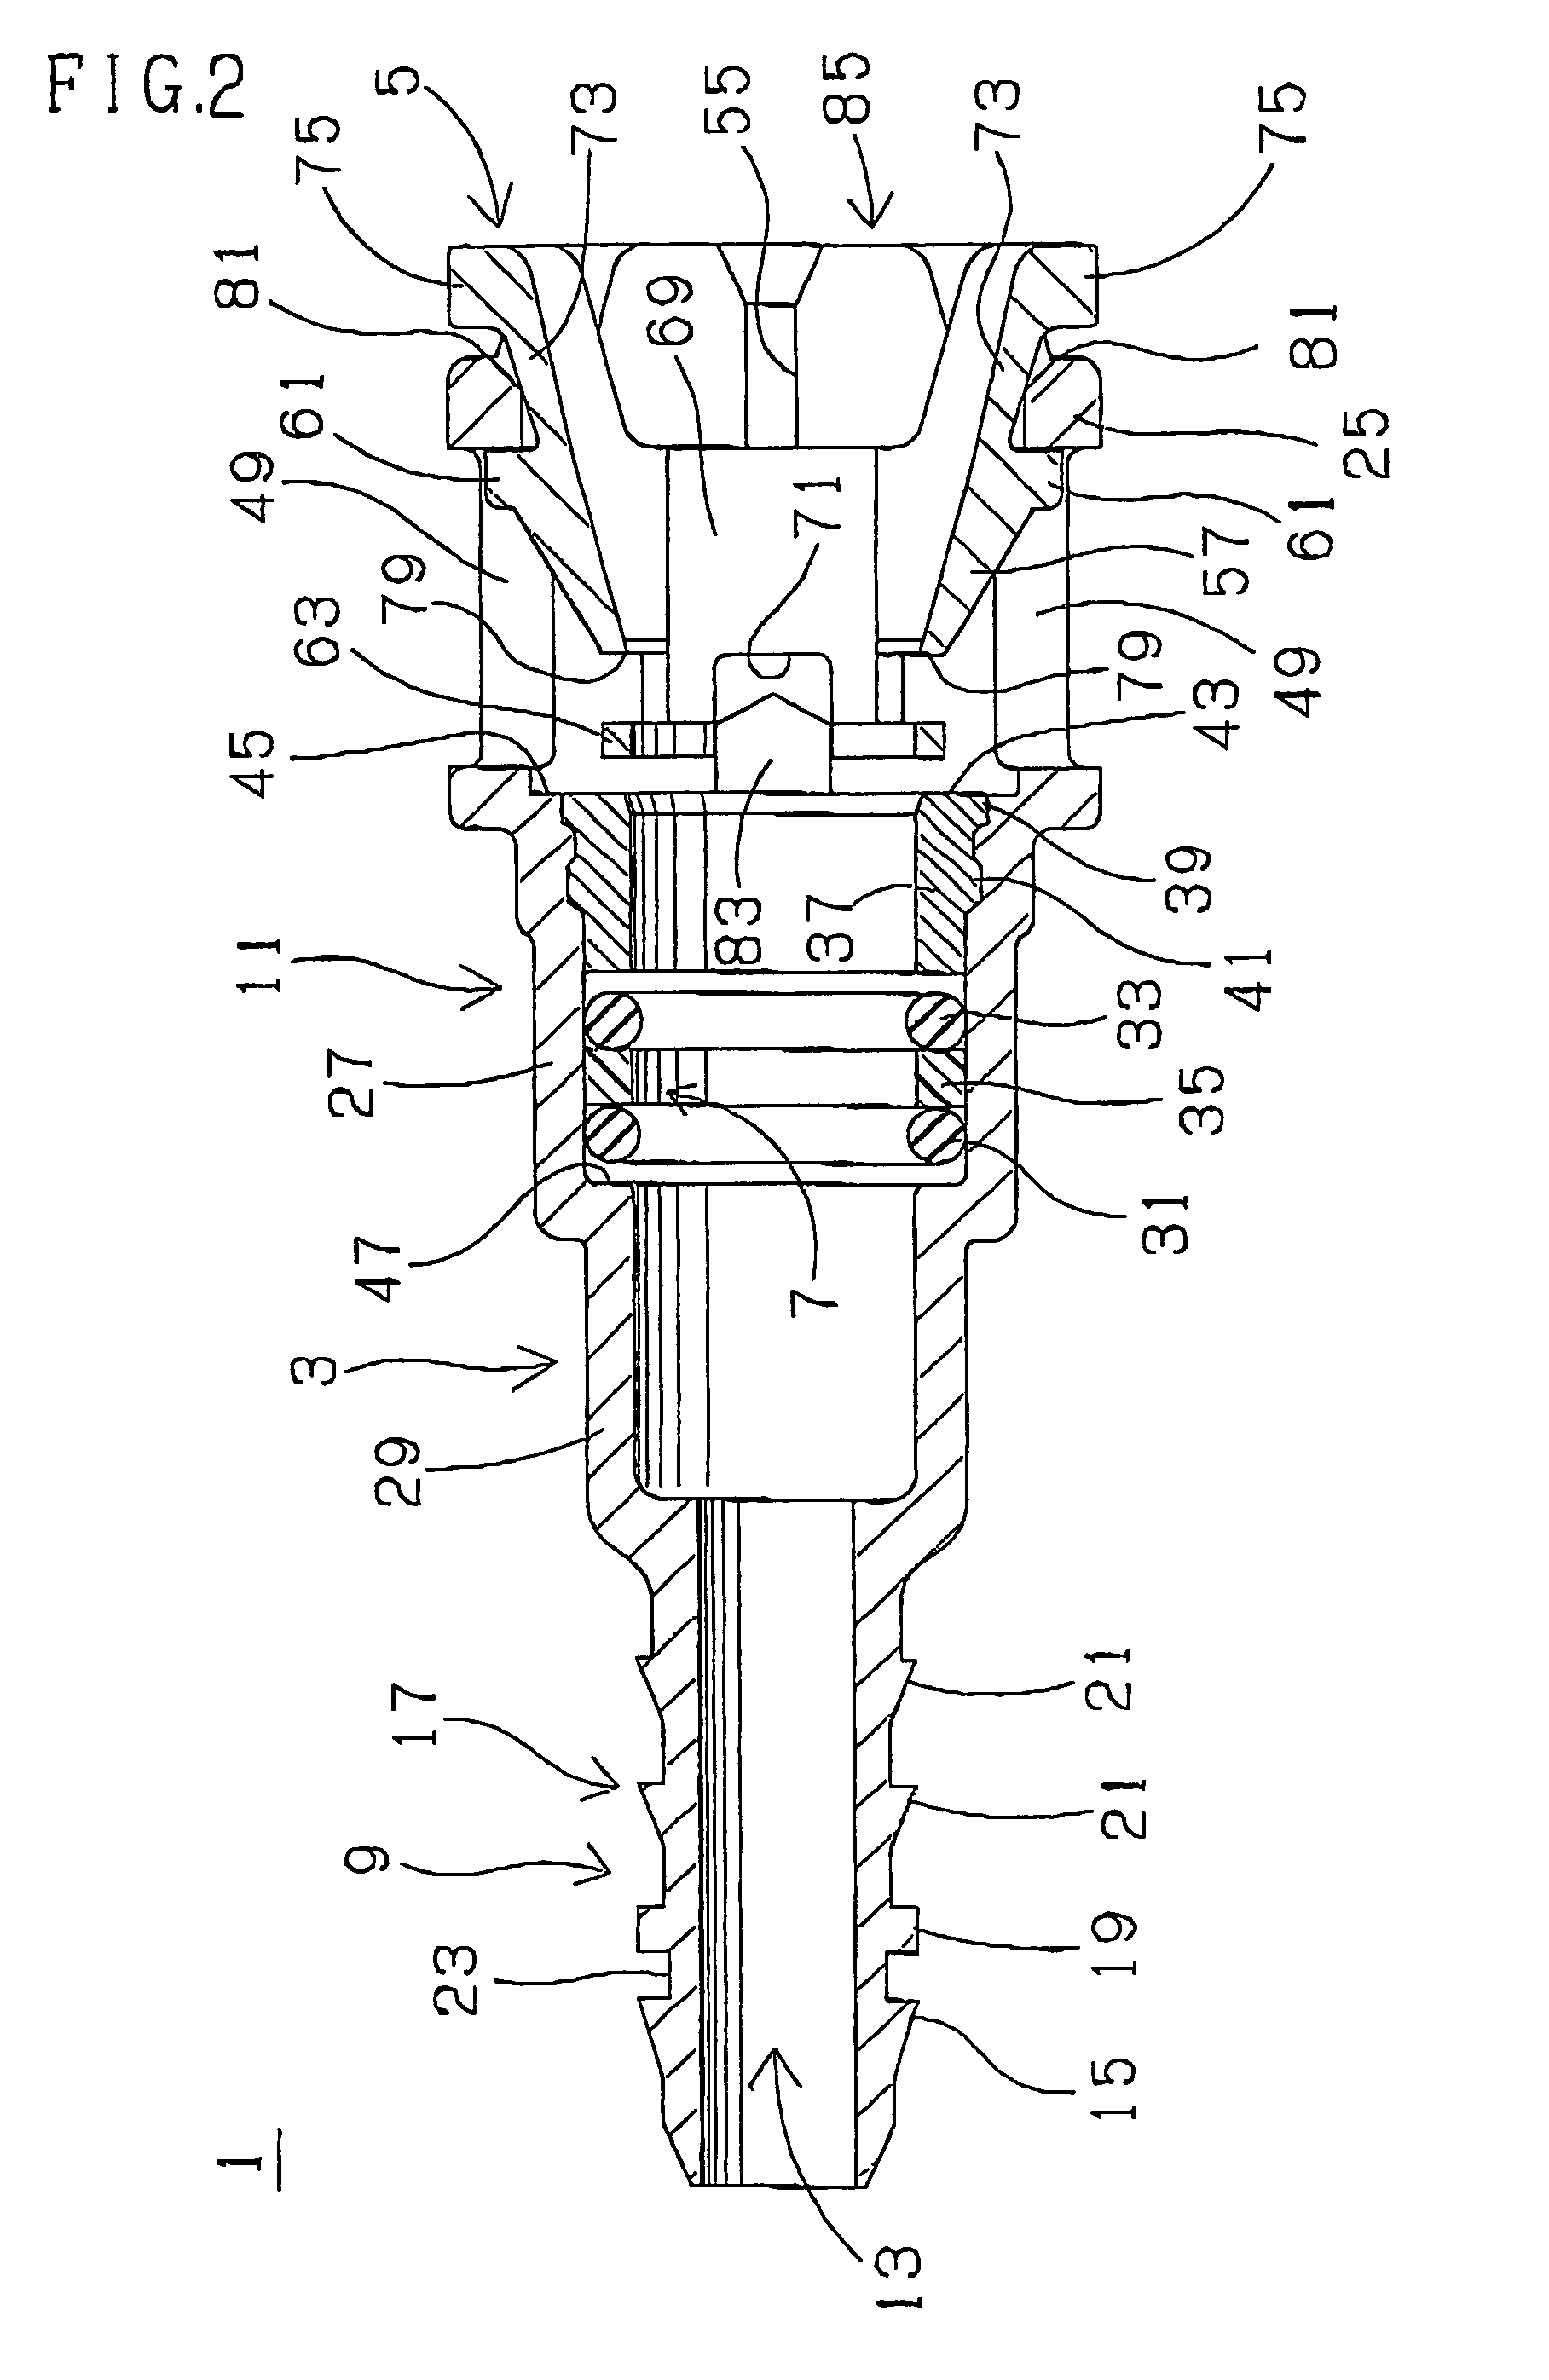 Connection verifying device and connection verifying structure for a pipe and a connector